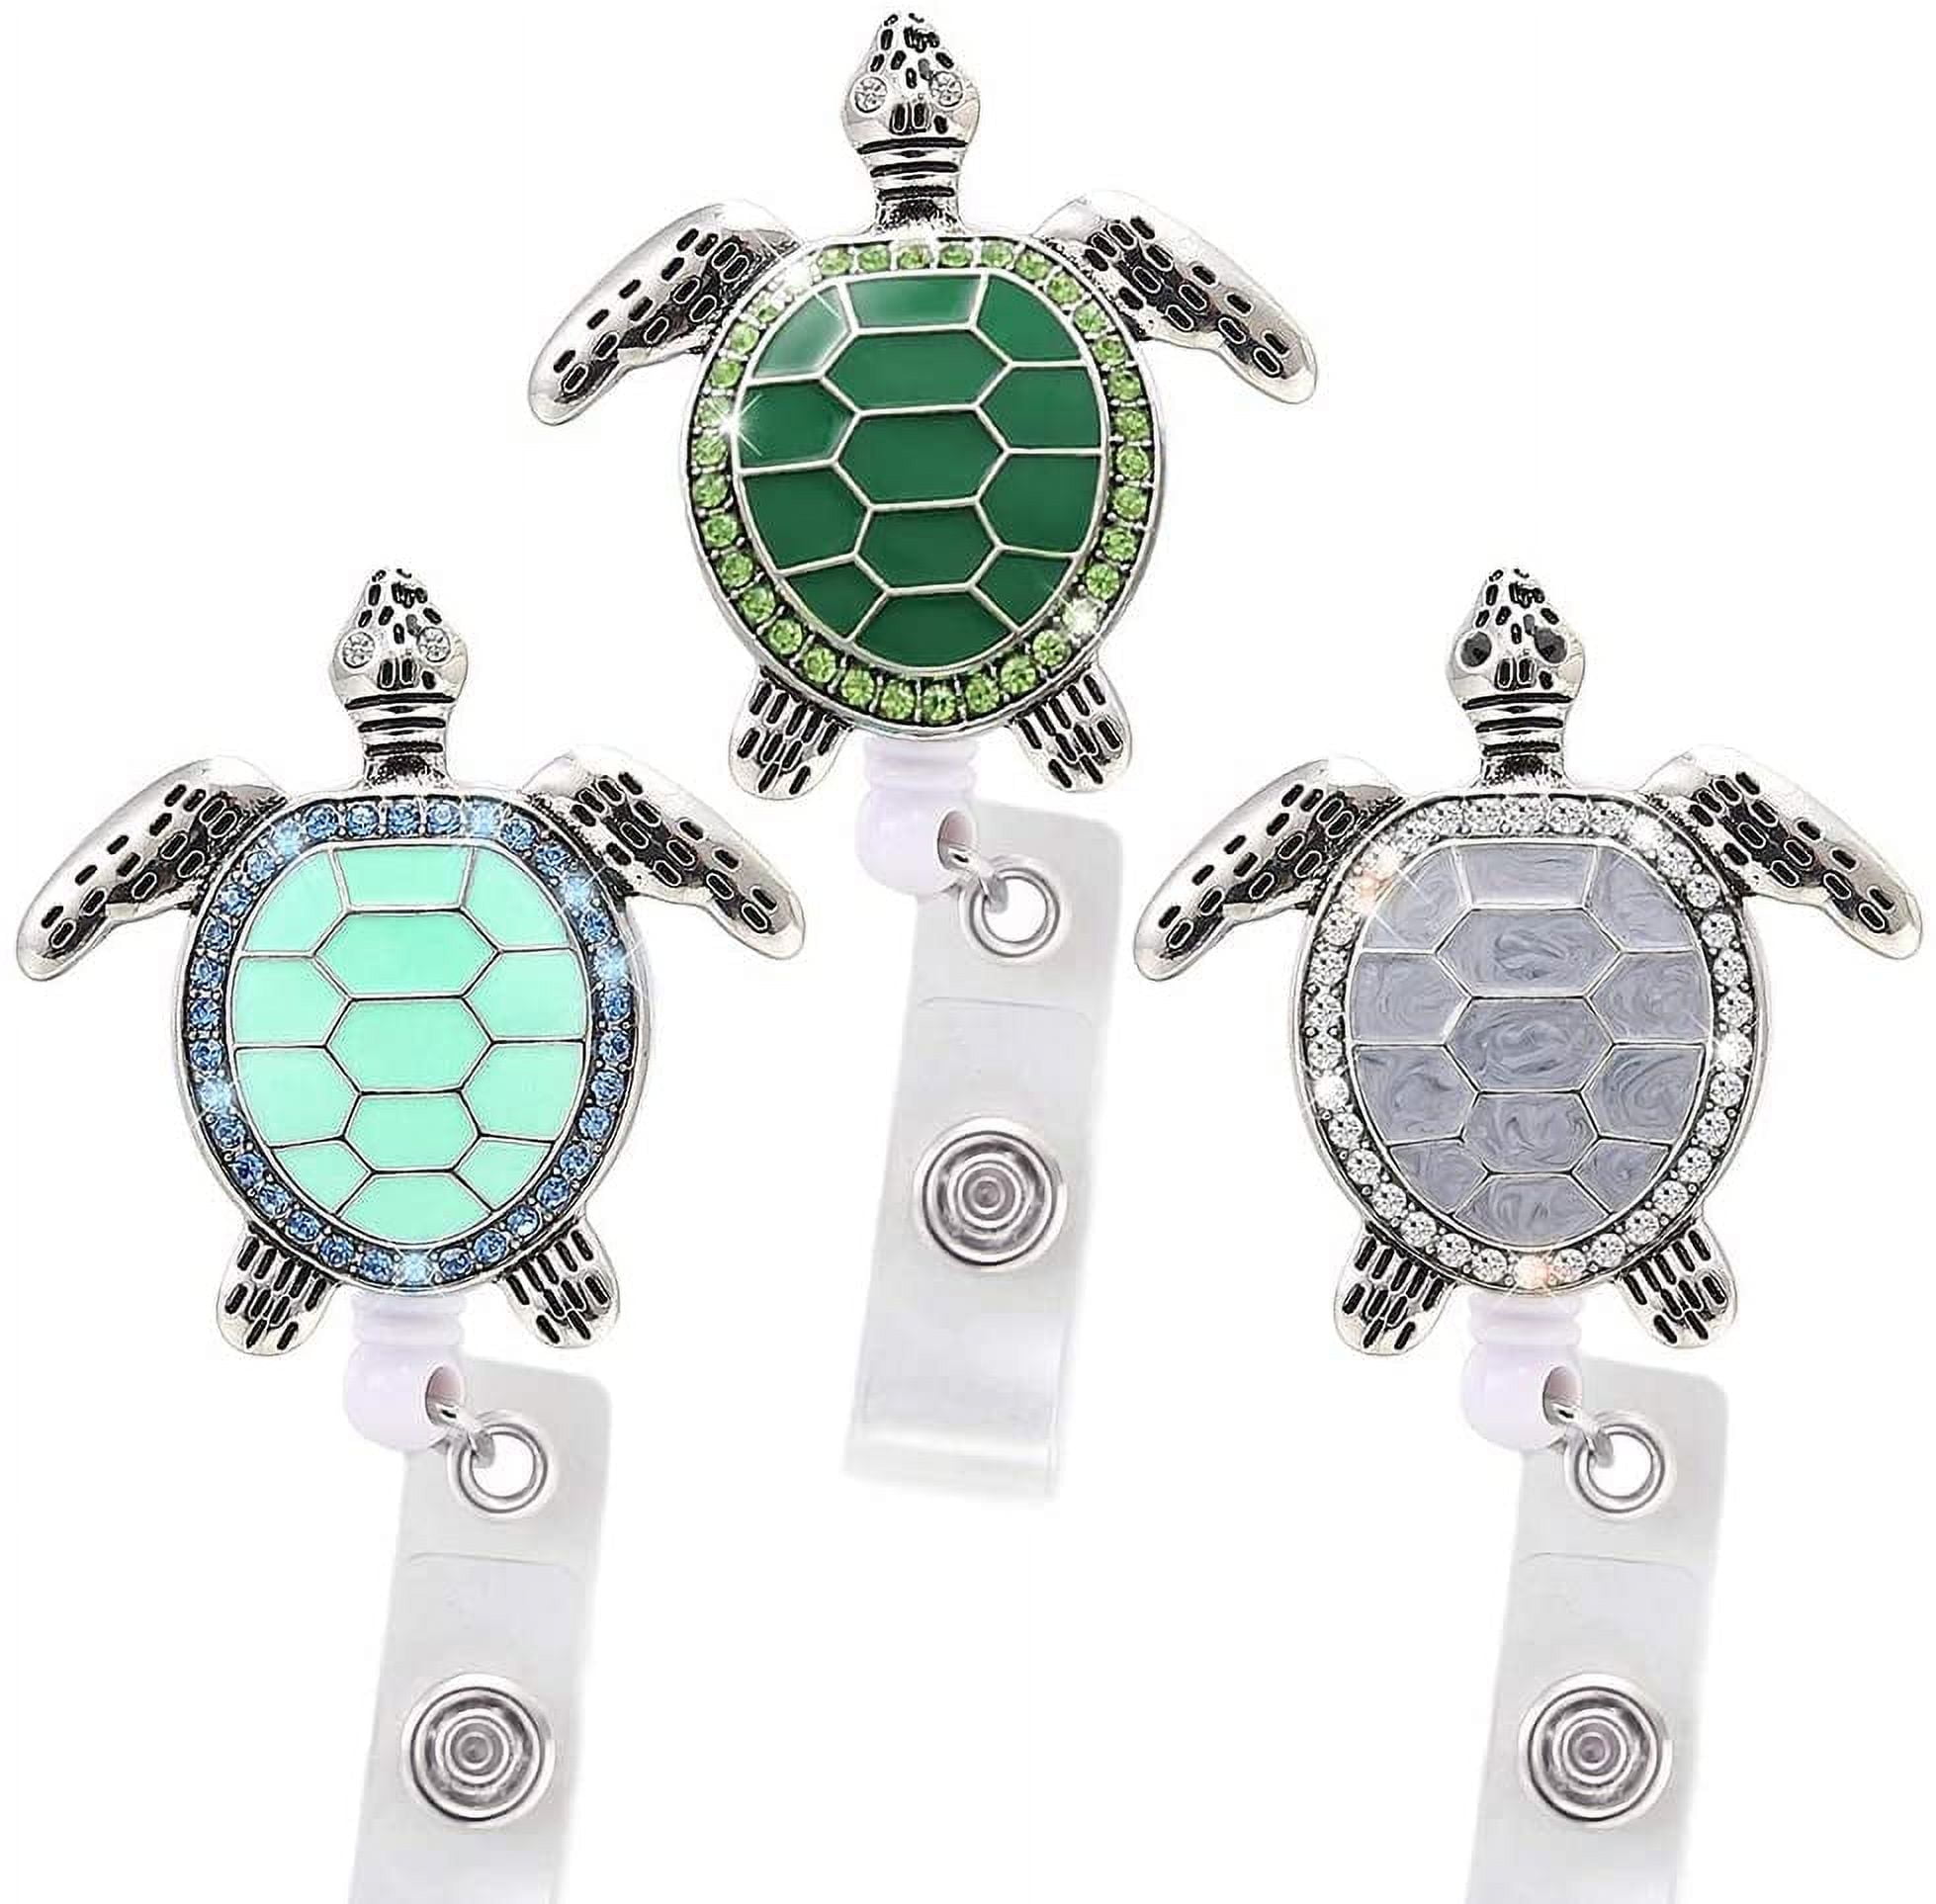 3PCS Sea Turtle Badge Reel - Retractable Badge Holder with